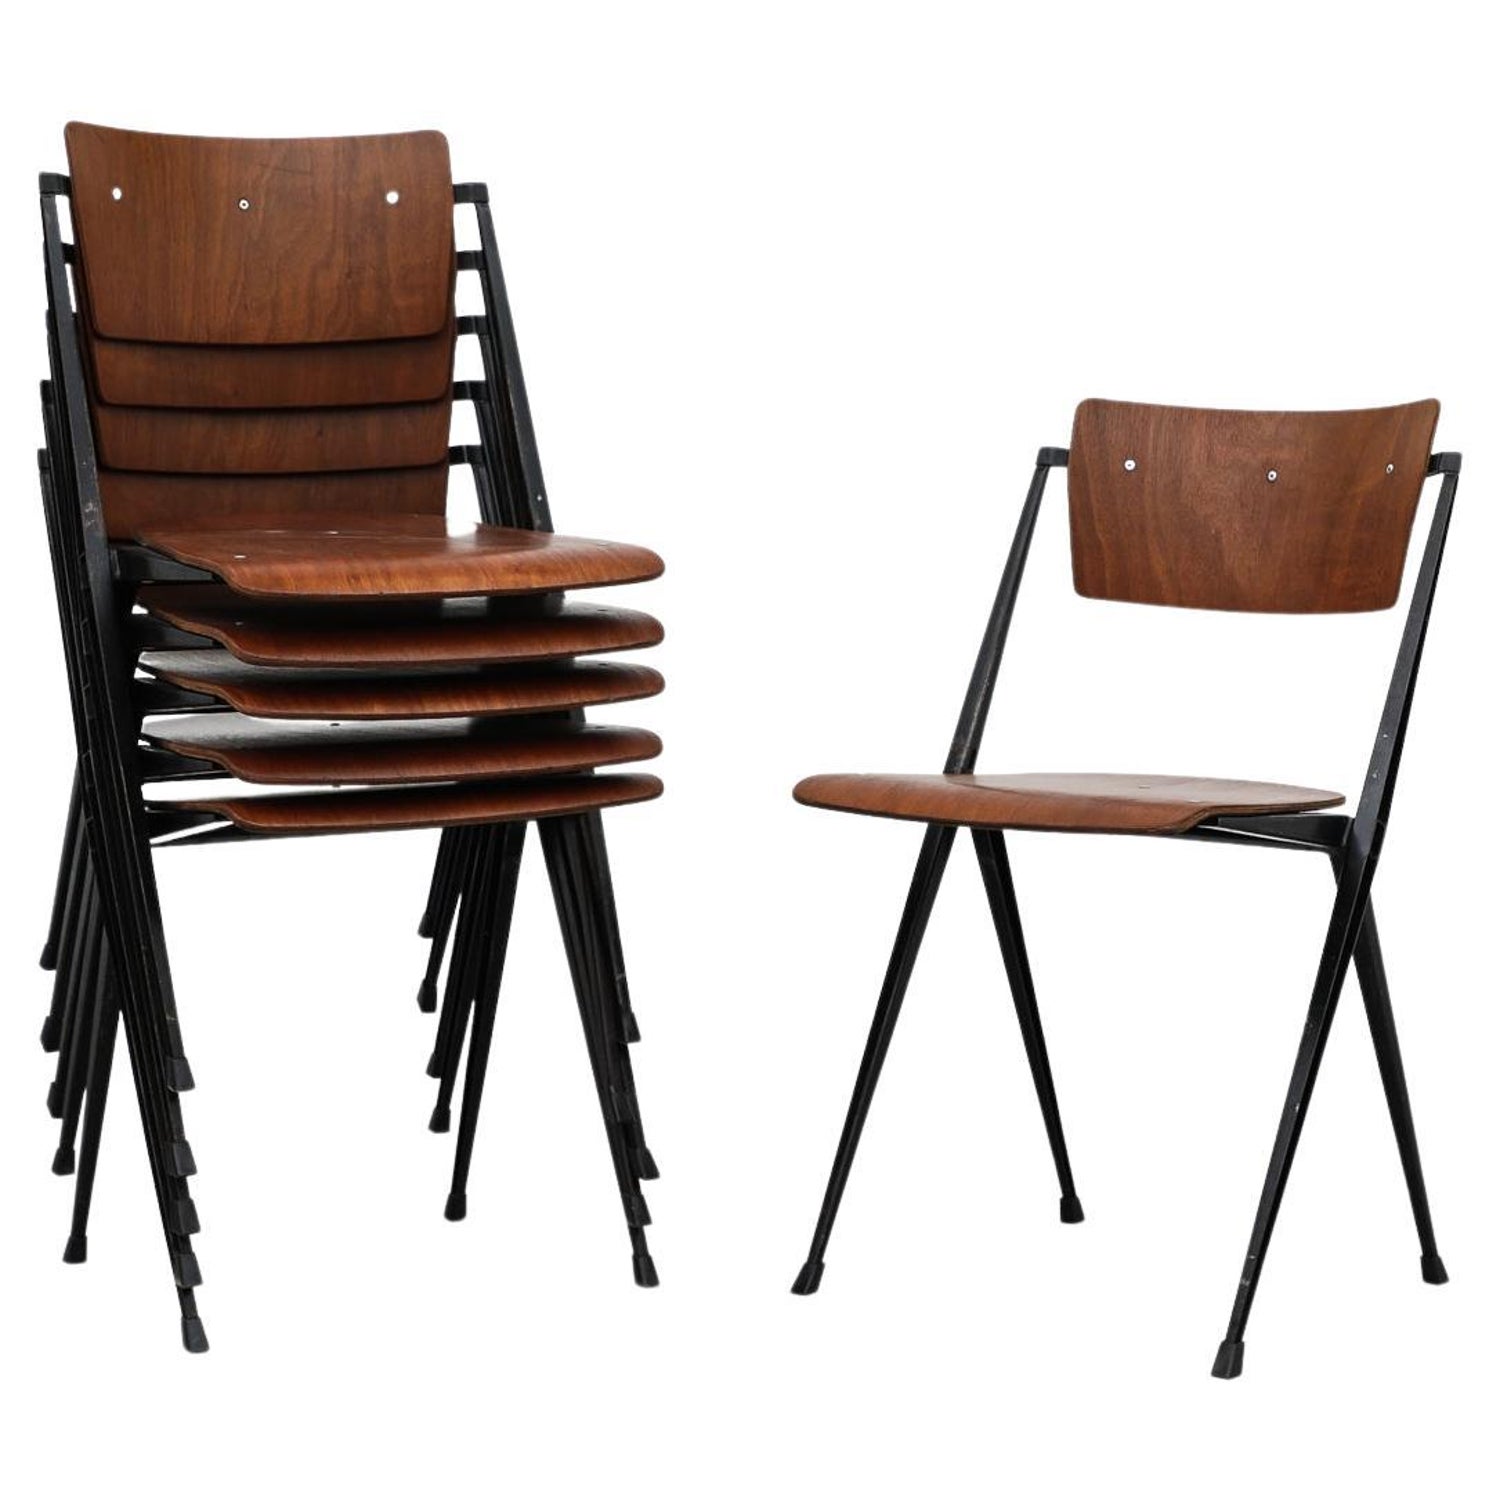 Set of 10 Wim Rietveld Pyramid Stacking Chairs For Sale at 1stDibs